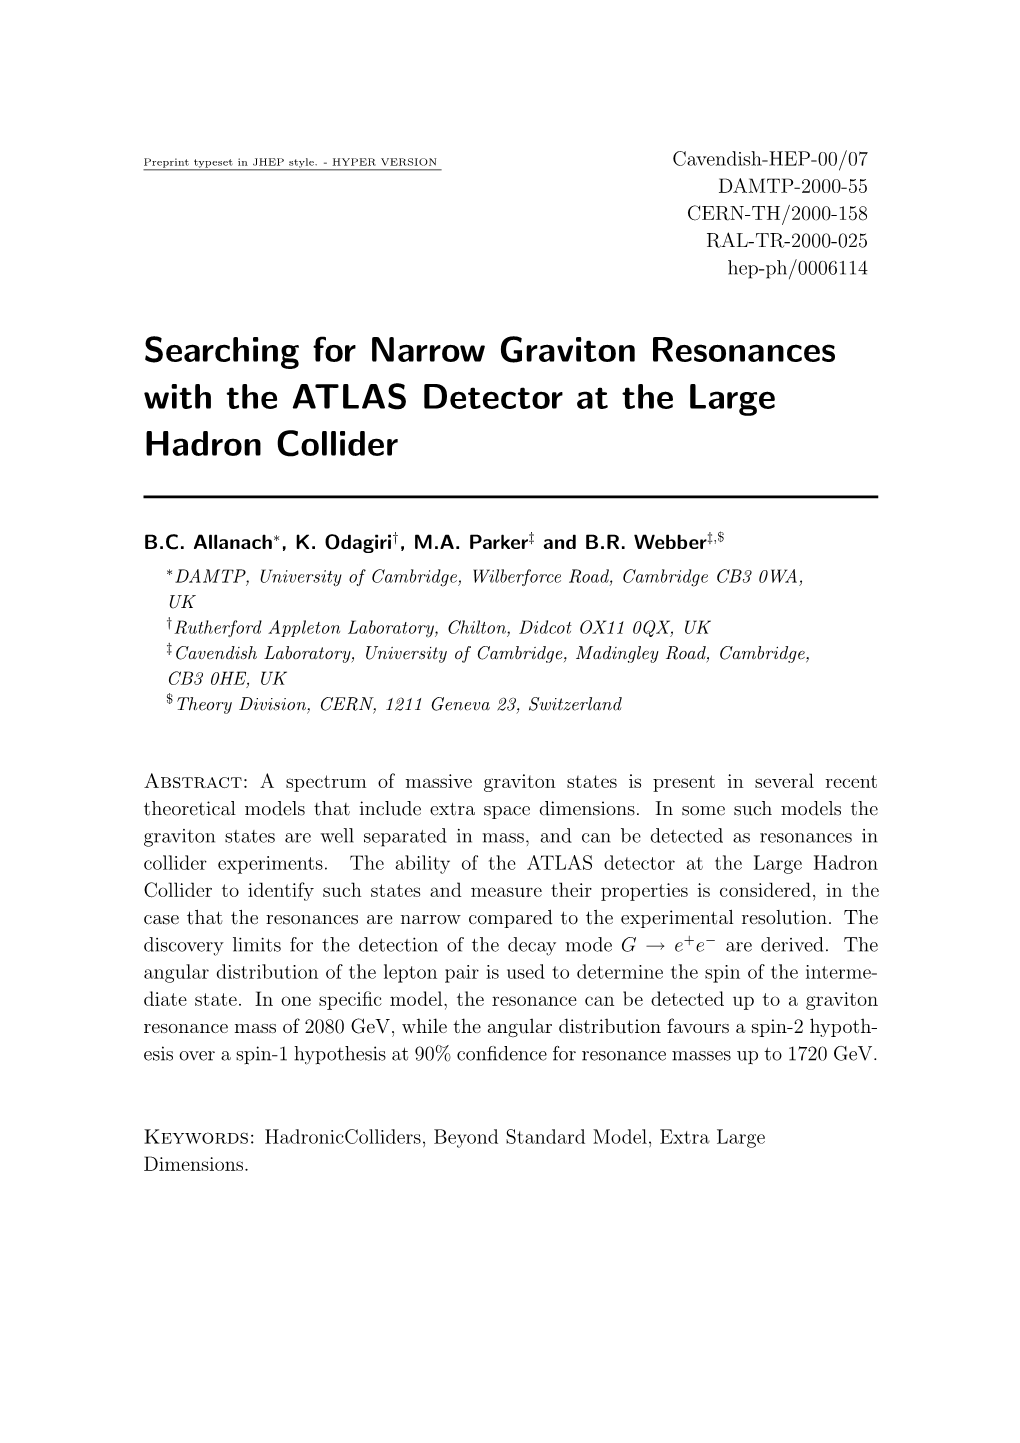 Searching for Narrow Graviton Resonances with the ATLAS Detector at the Large Hadron Collider